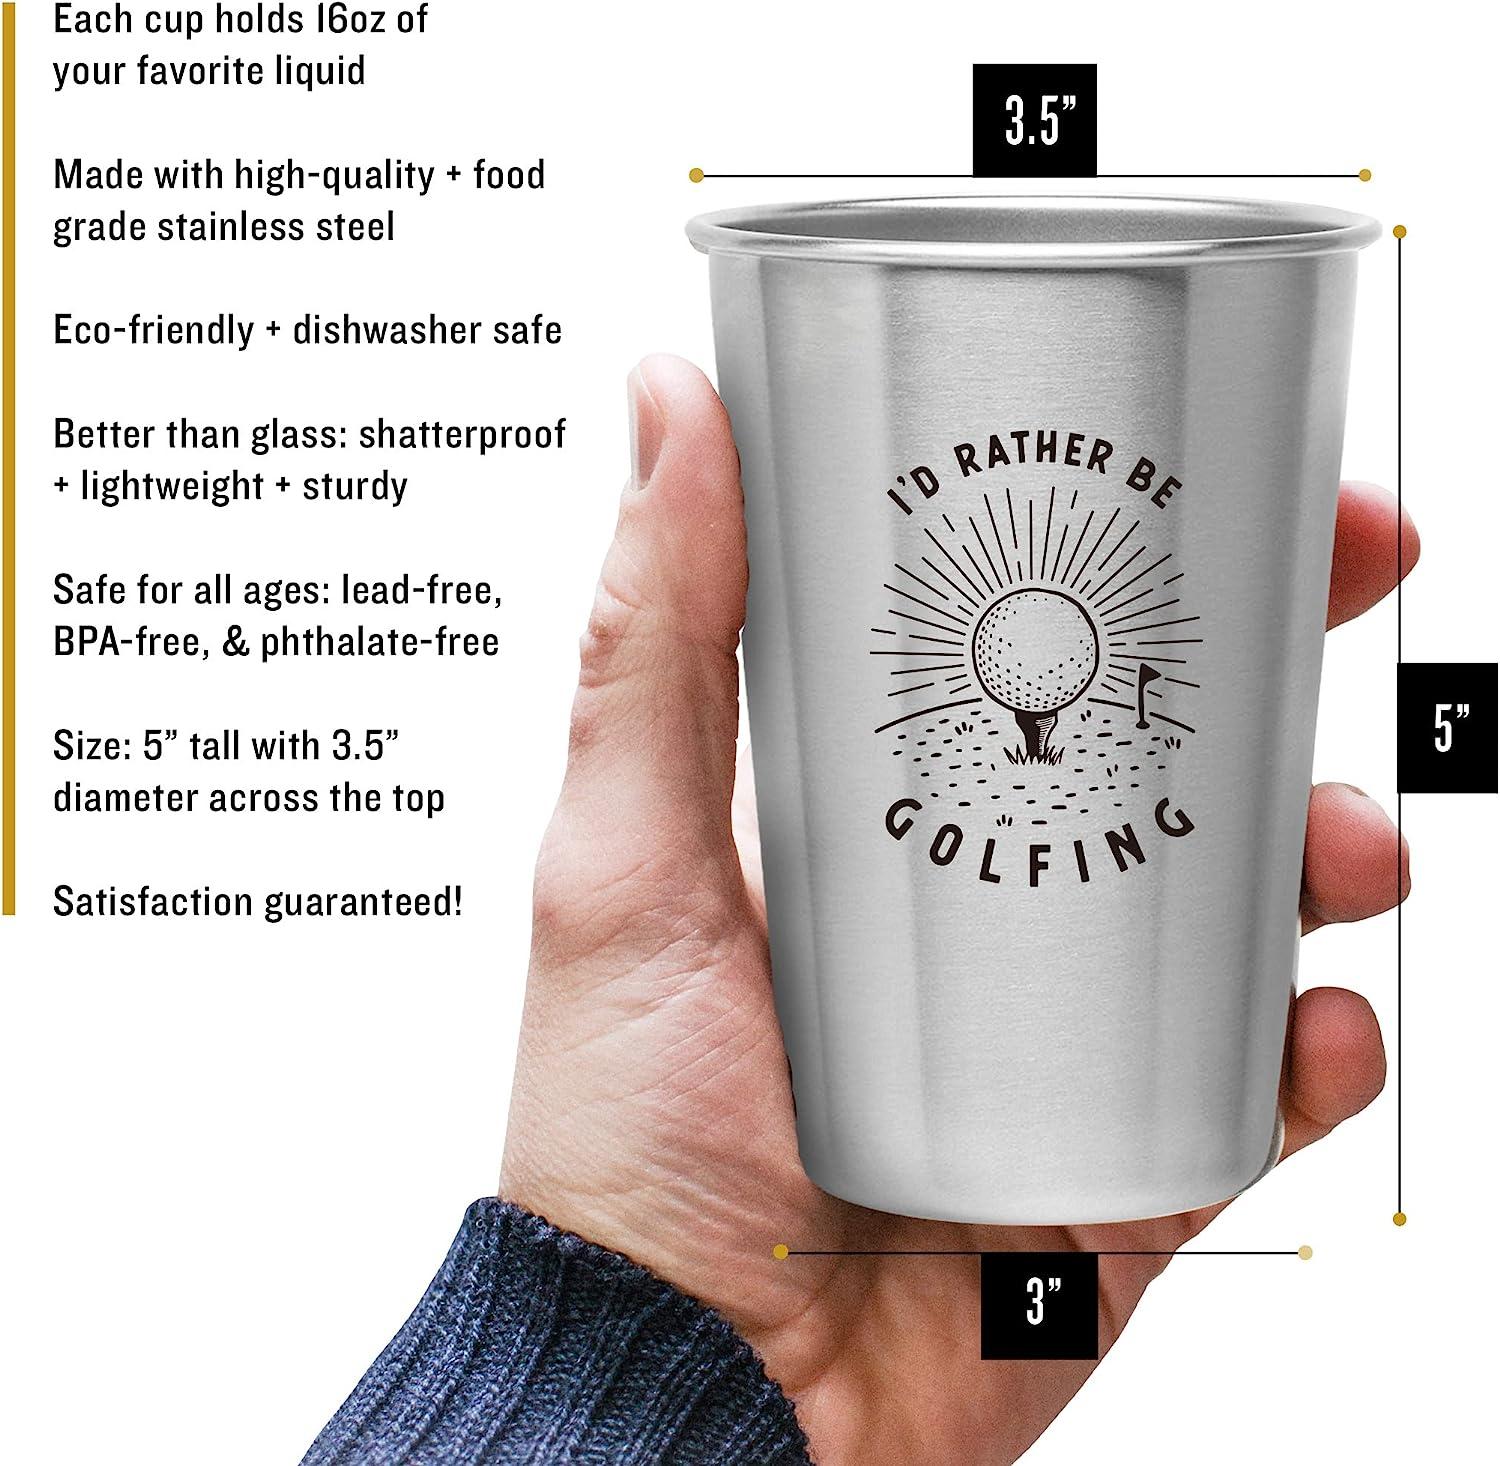 Magic Pine I'd Rather Be Golfing Stainless Steel Pint Cup Tumbler - Funny  Gift for Golfers, Guys, Gals - Use at Home, Putting, Tee Box, Office,  Travel, as A Father's Day or